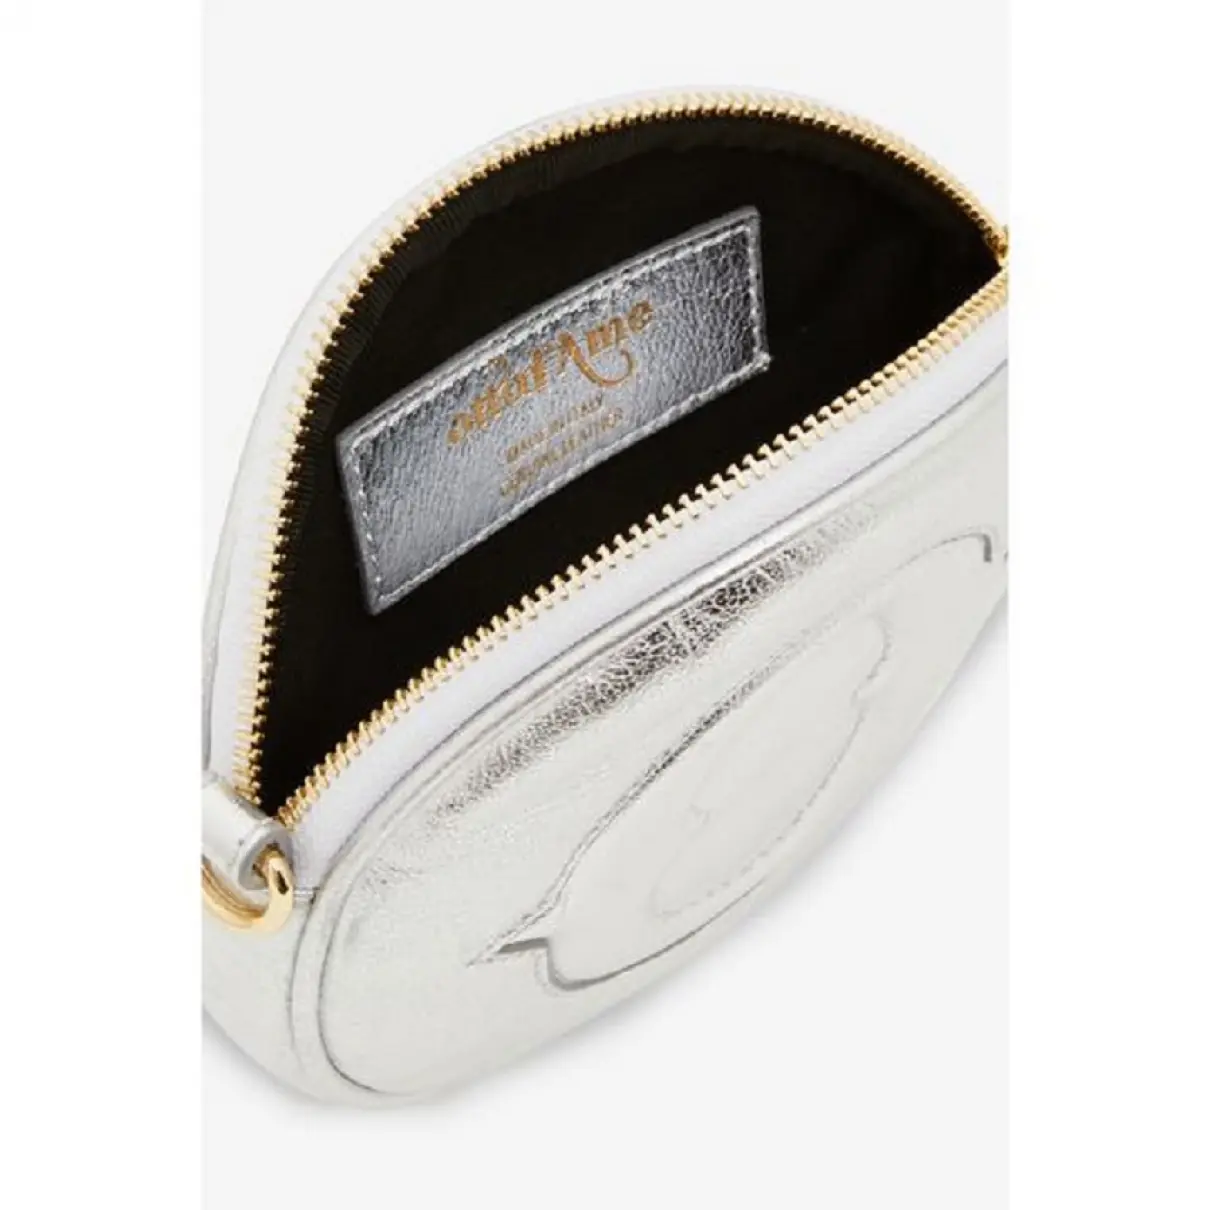 Buy Ottod'Ame Leather clutch bag online